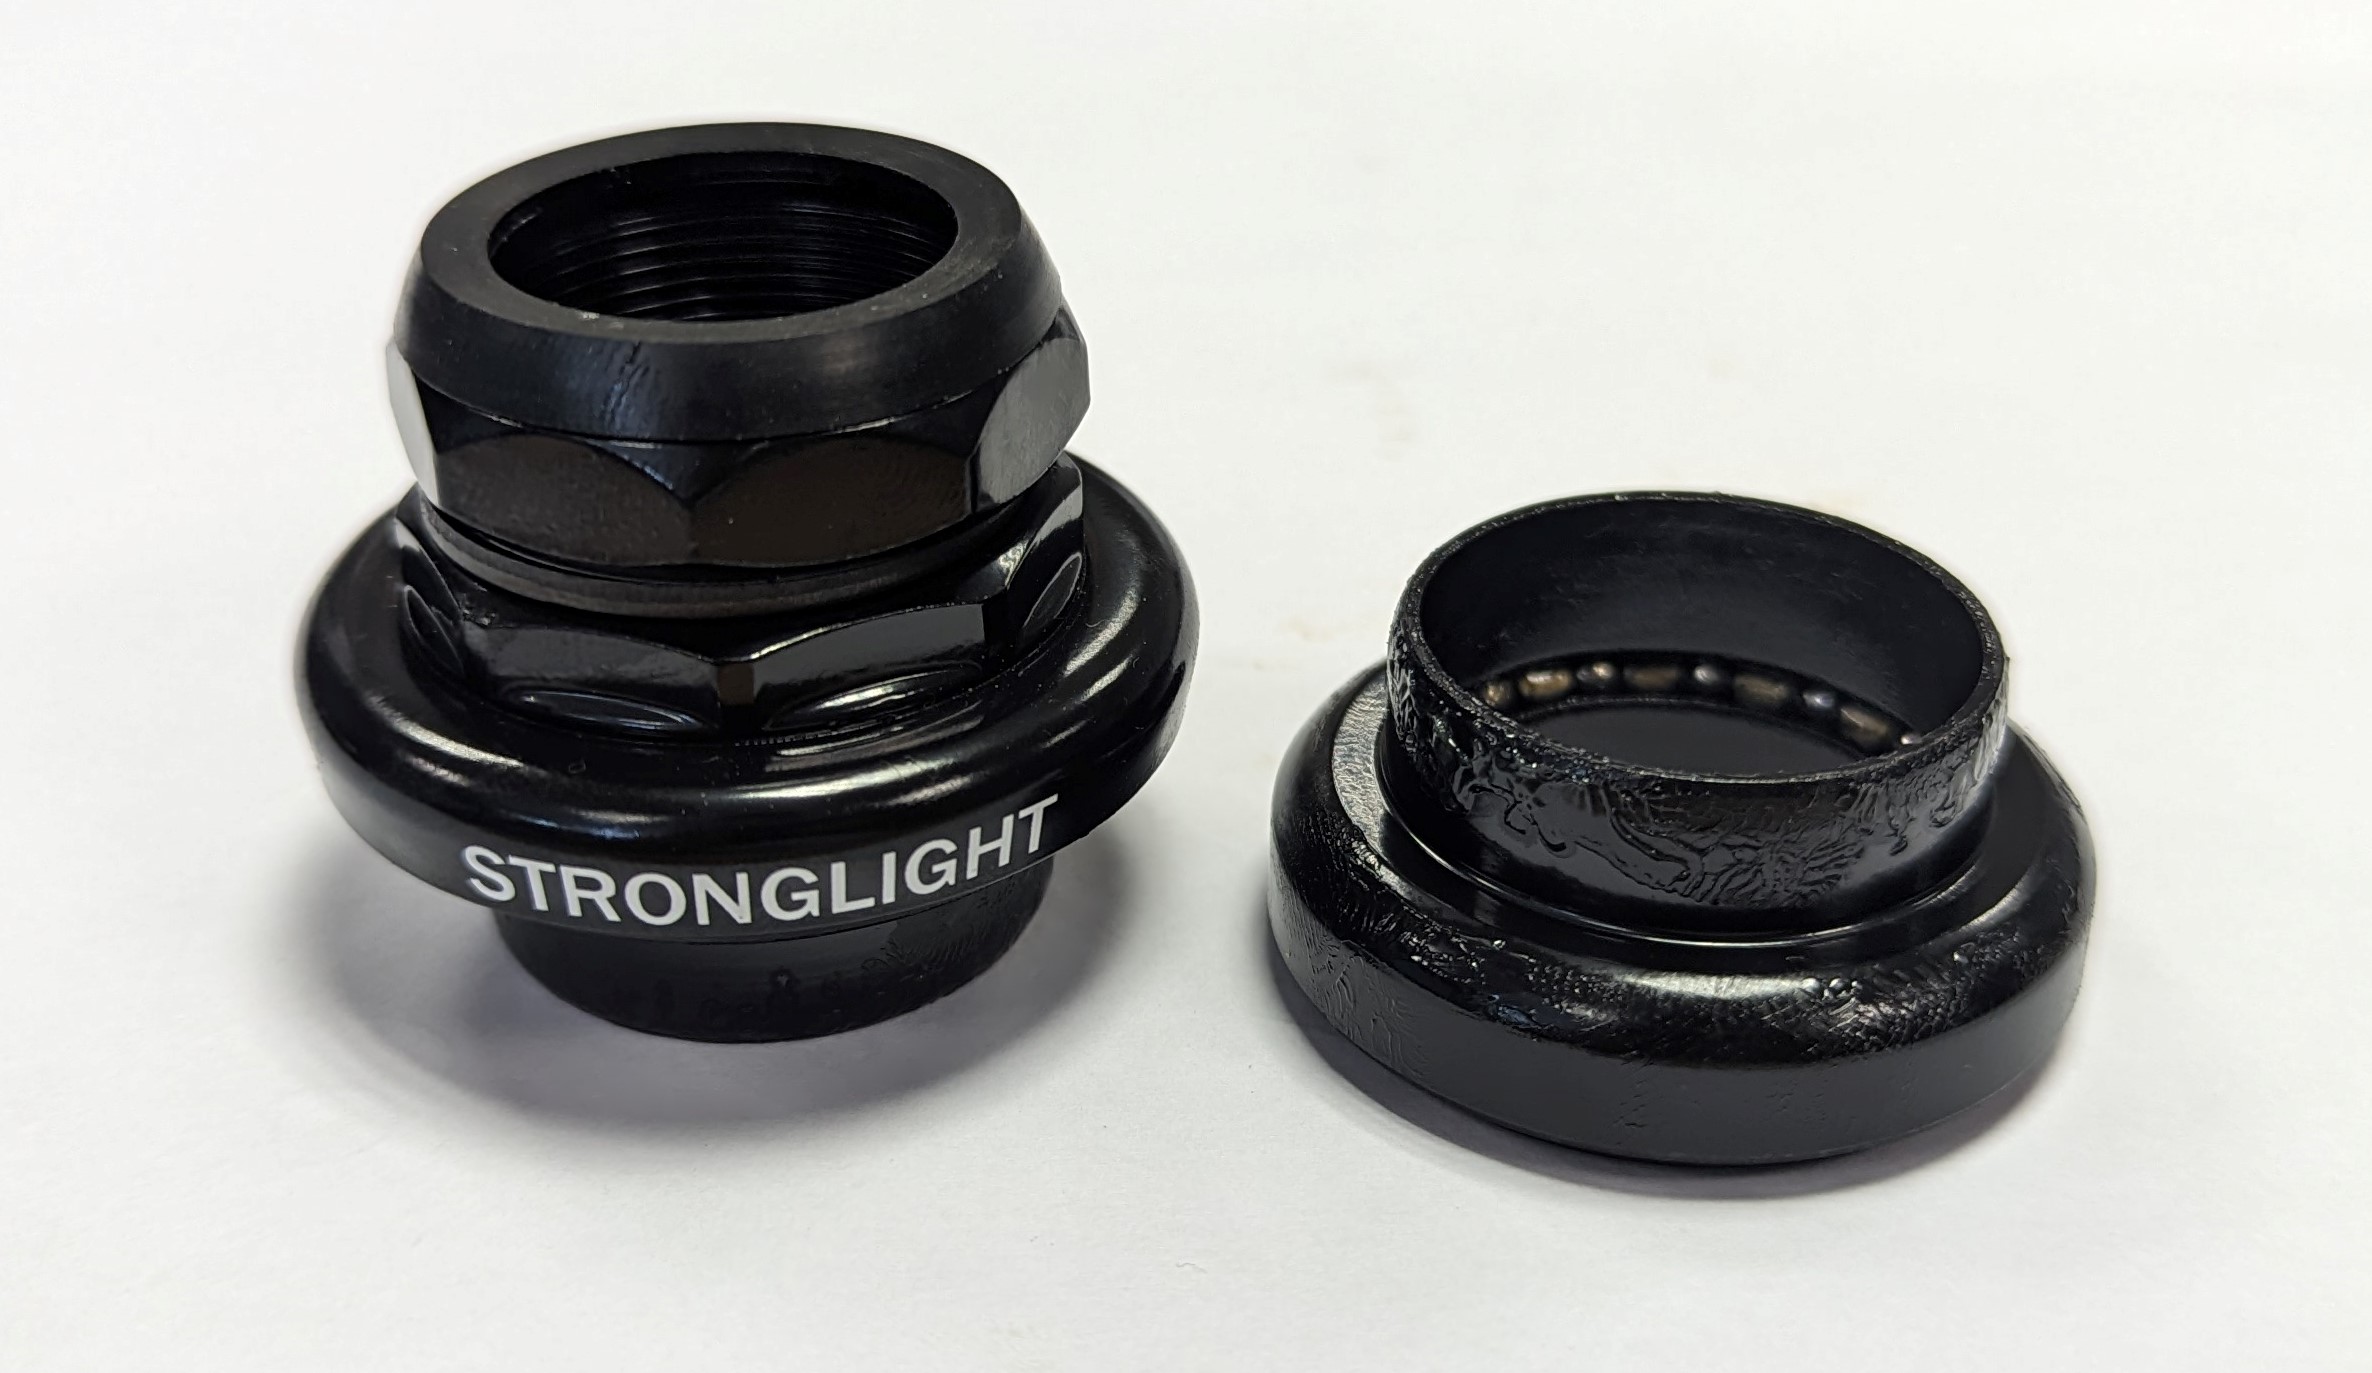 V0163 Stronglight ( 1" ) - JD A9 - Threaded Steel Headset